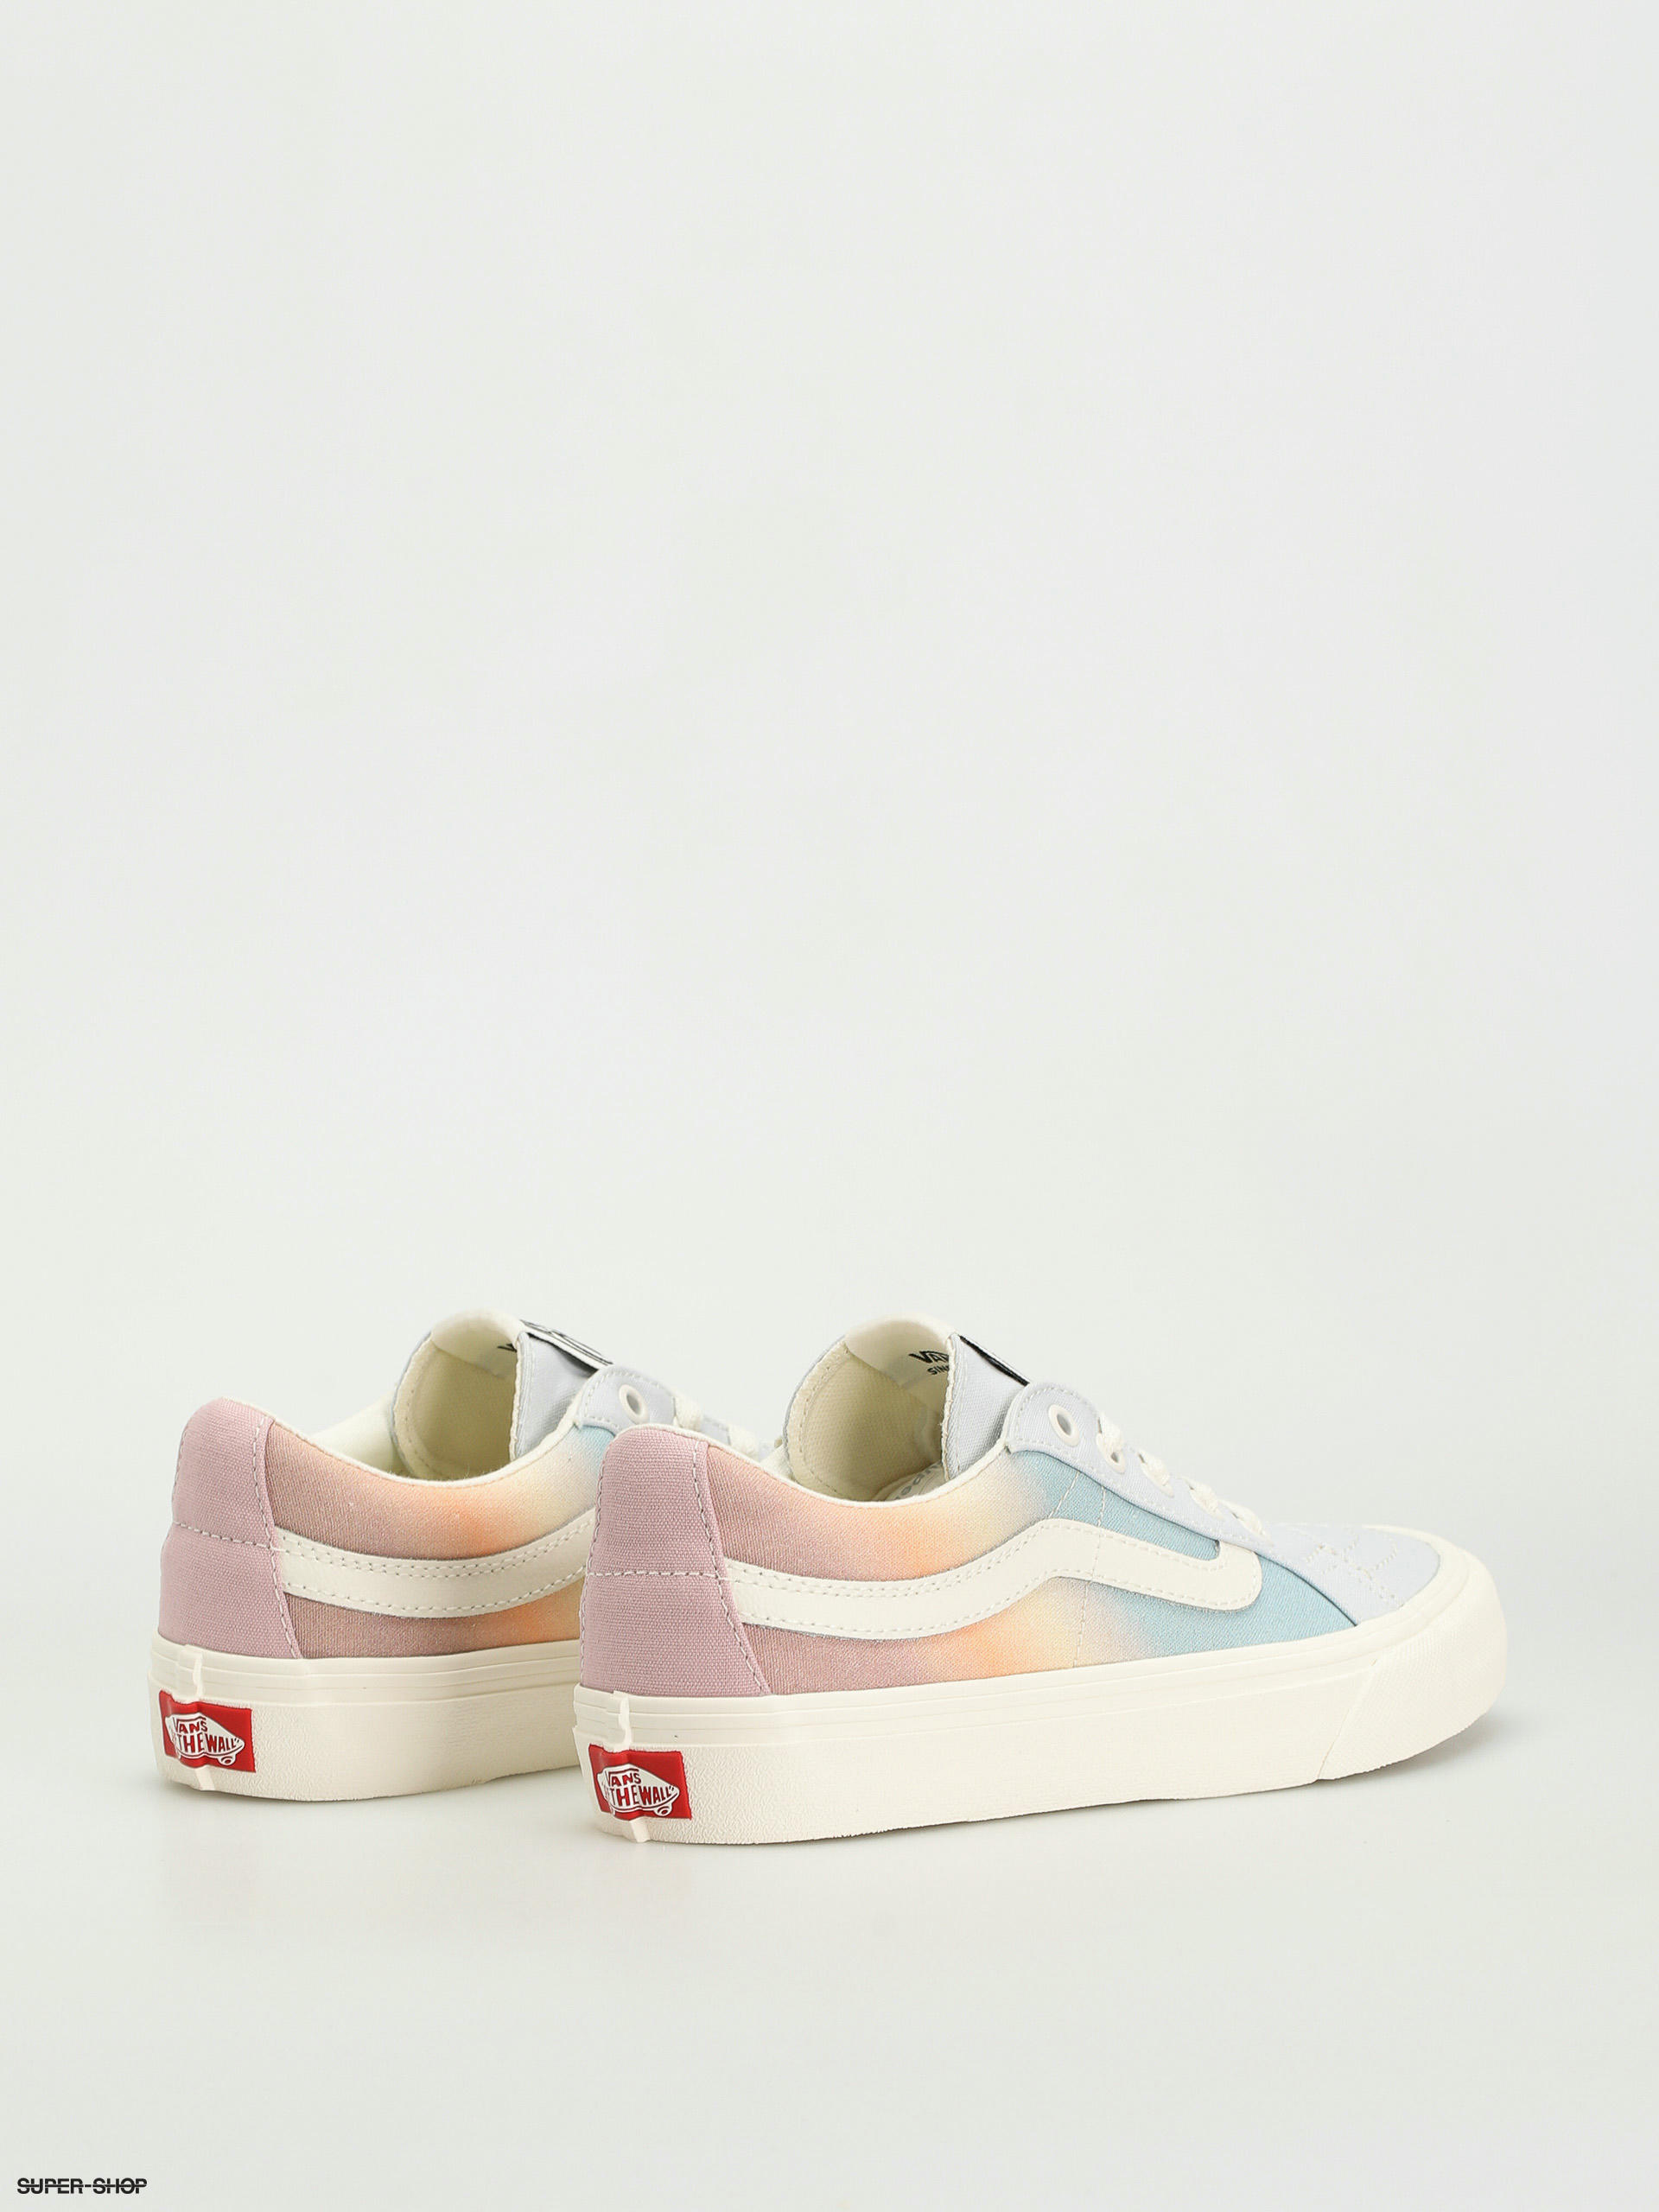 Vans SK8-LOW REISSUE VR3 SF - Sneakers Femme ombre multi - Private